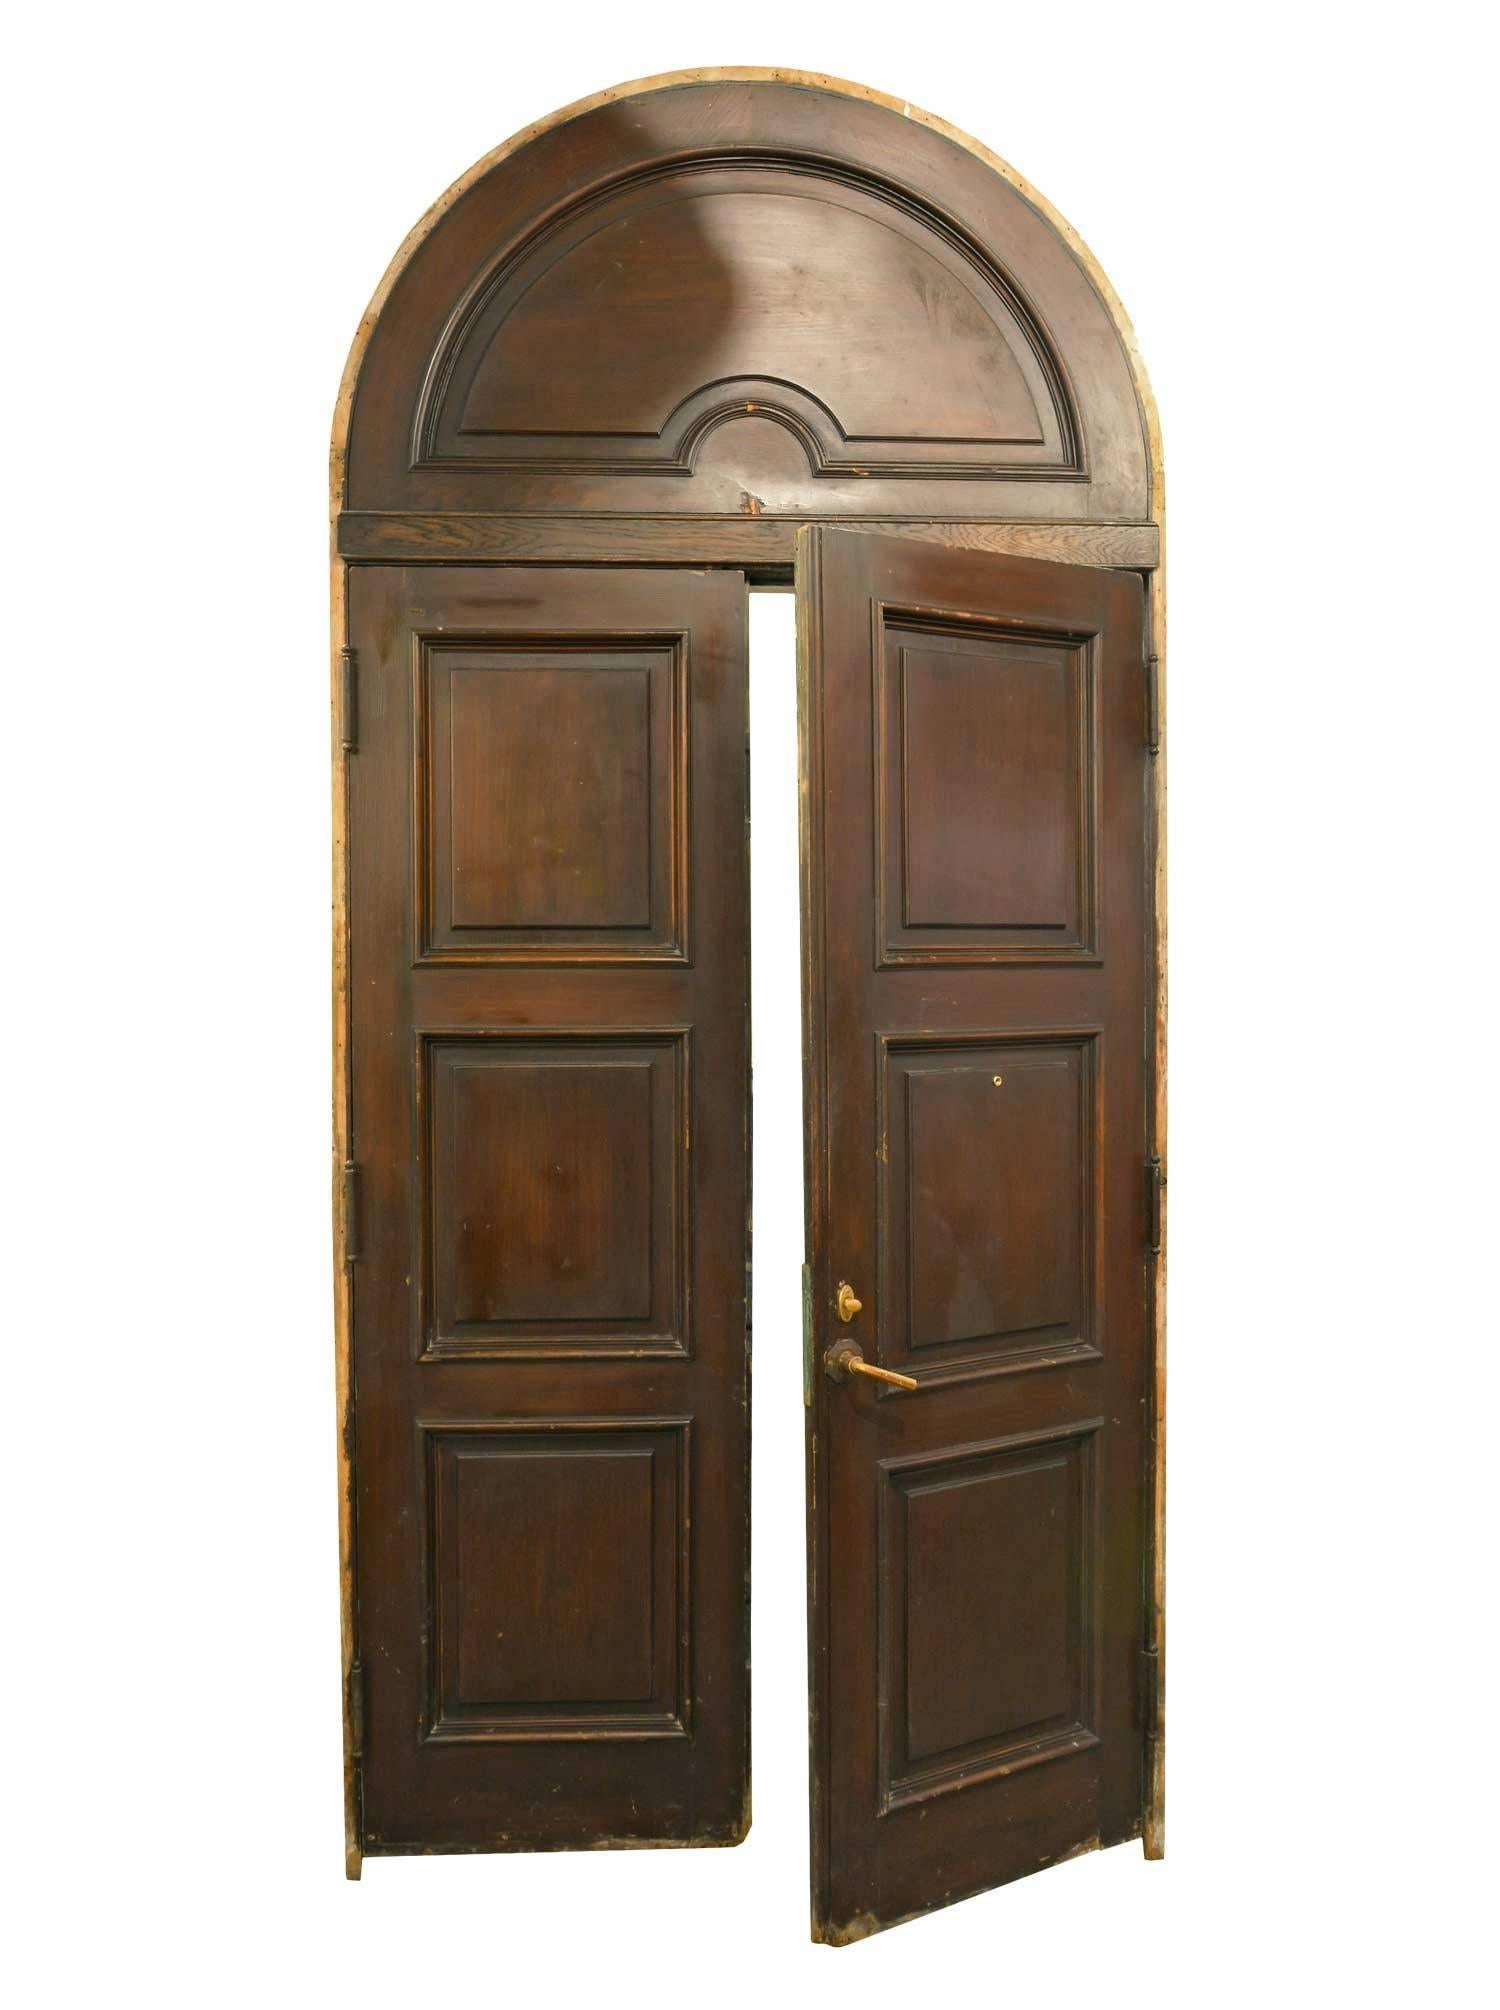 This set of Colonial Revival-style doors is impressive in height and in its simple design. One side in stained oak, the other painted. It comes complete with its original jamb and hardware. 

The door unit is 117